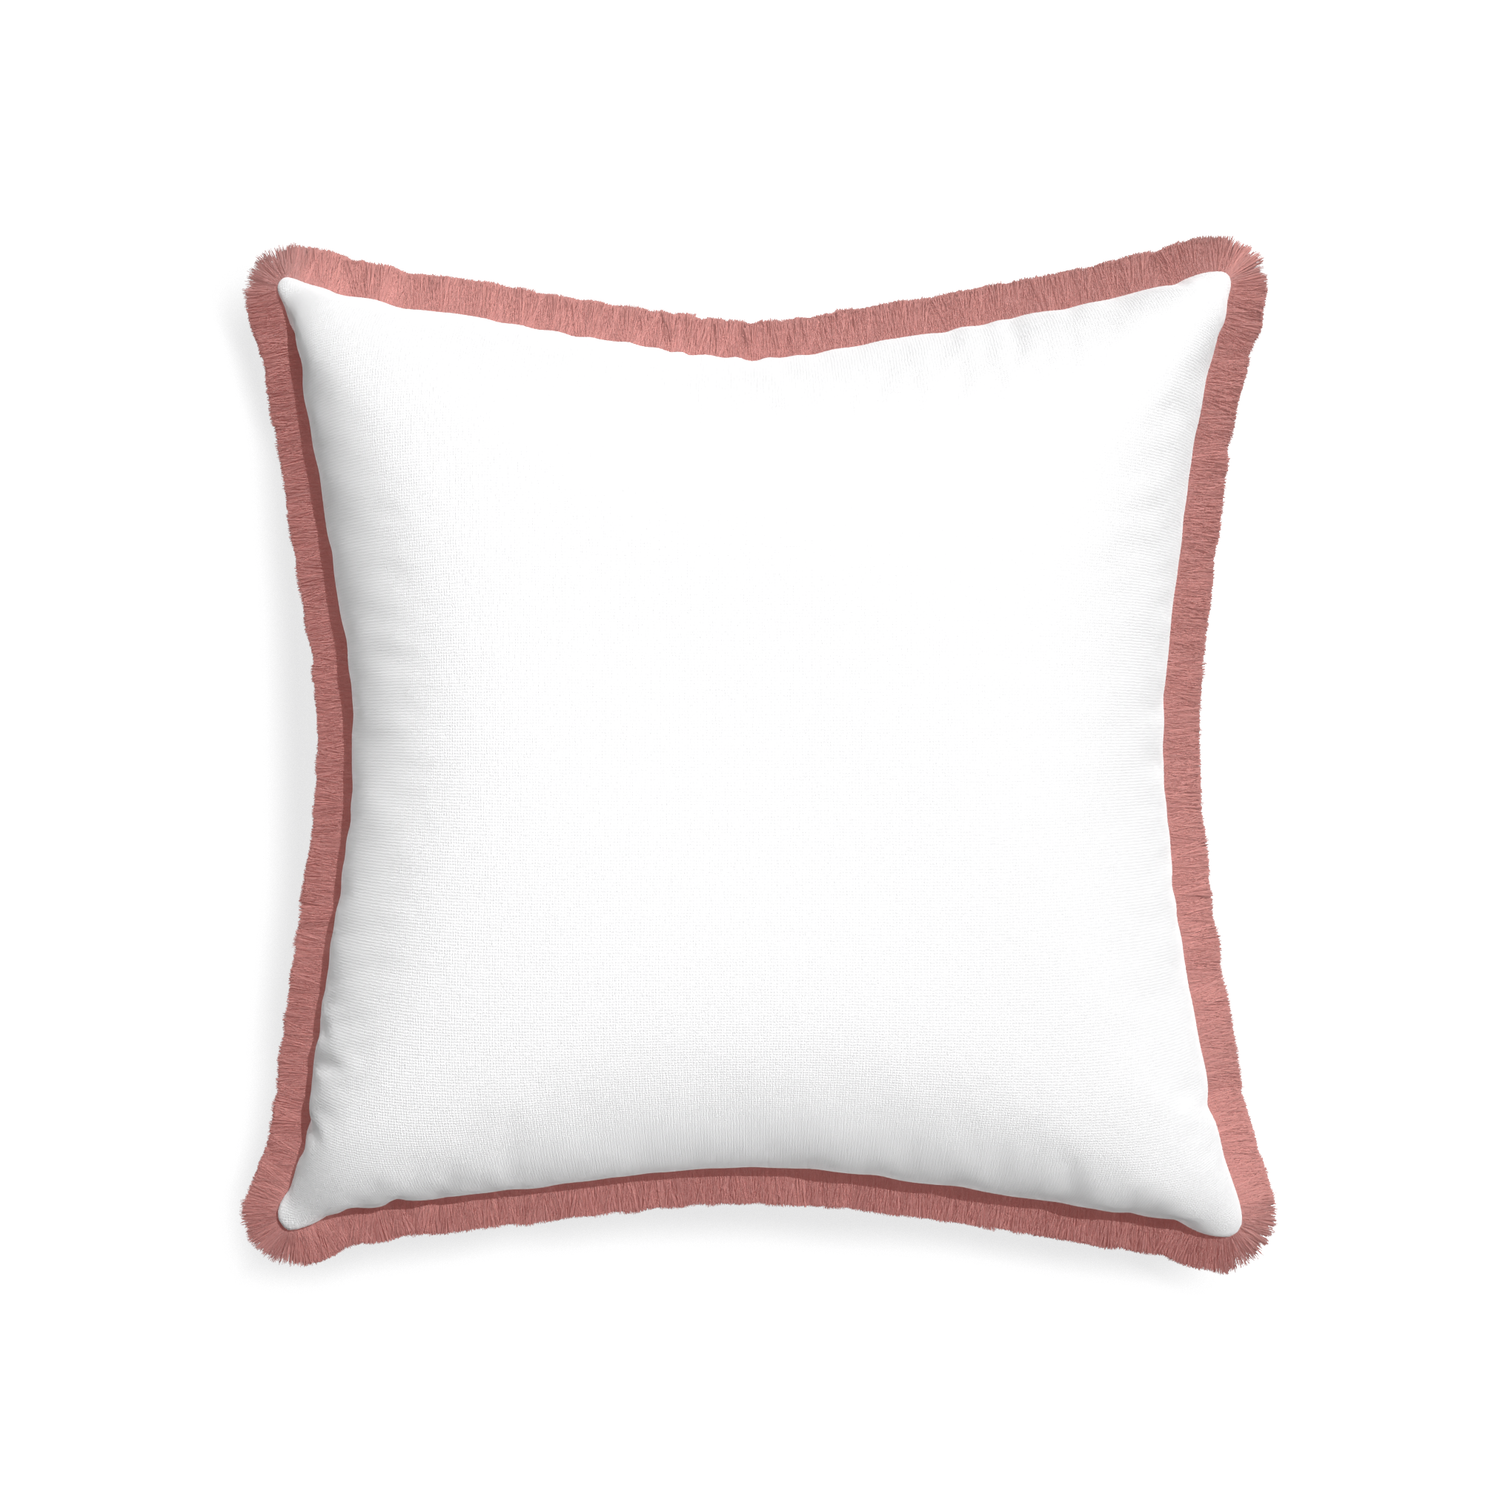 22-square snow custom white cottonpillow with d fringe on white background